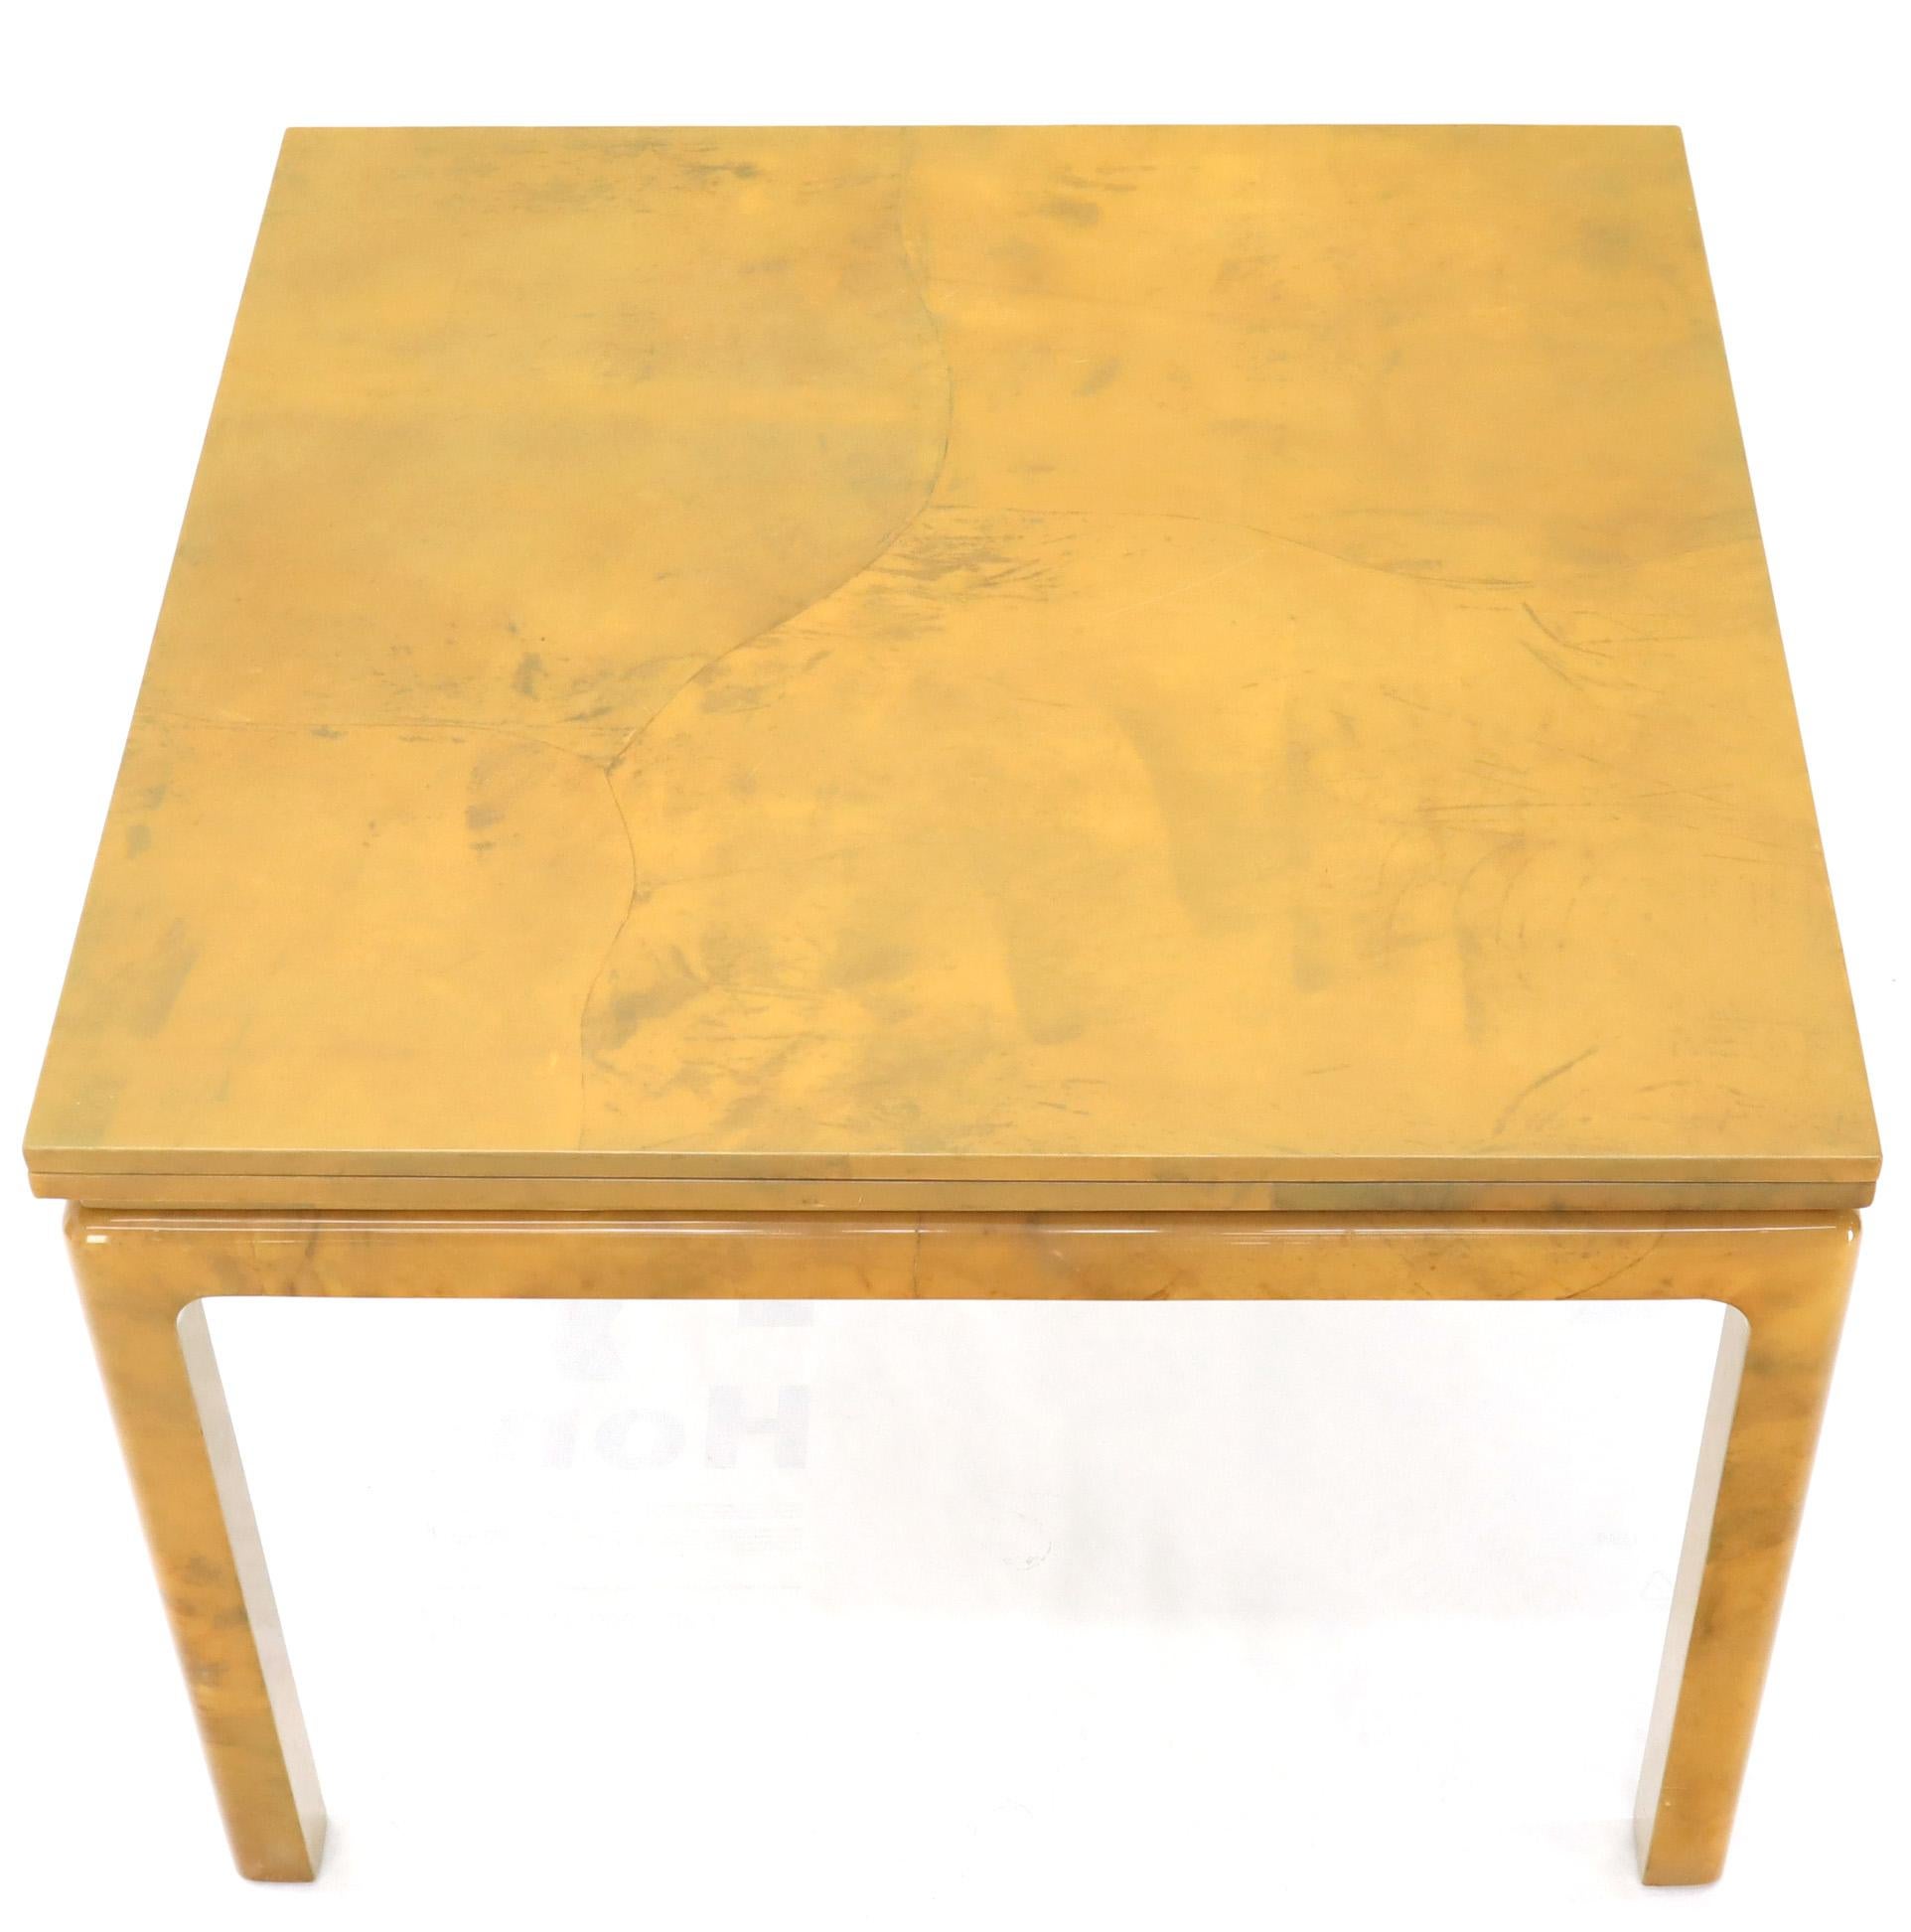 Lacquered Lacqured GoatSkin Parchment Square Flip Top Dining Table 